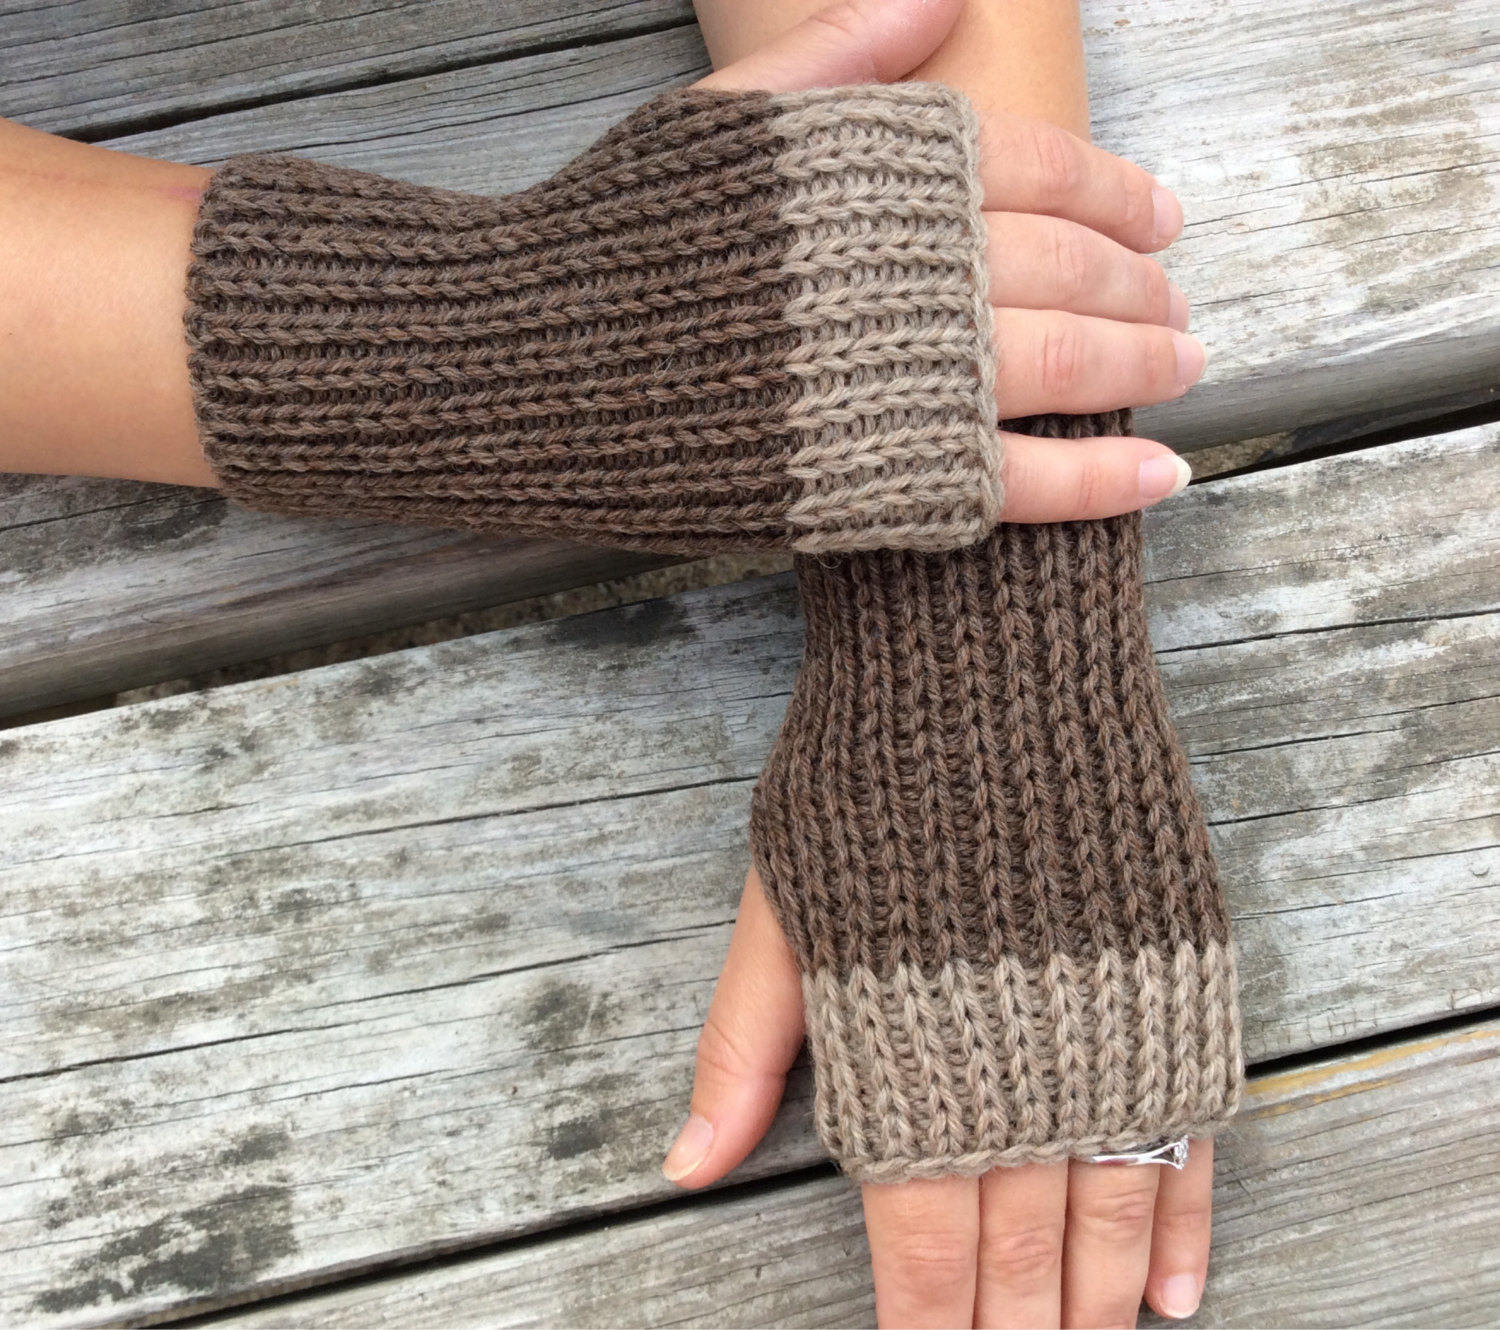 Mens Fingerless Gloves Knitting Pattern Brown Fingerless Gloves Mens Fingerless Gloves Knit Gloves Wrist Warmers Hand Warmers Texting Gloves Brown